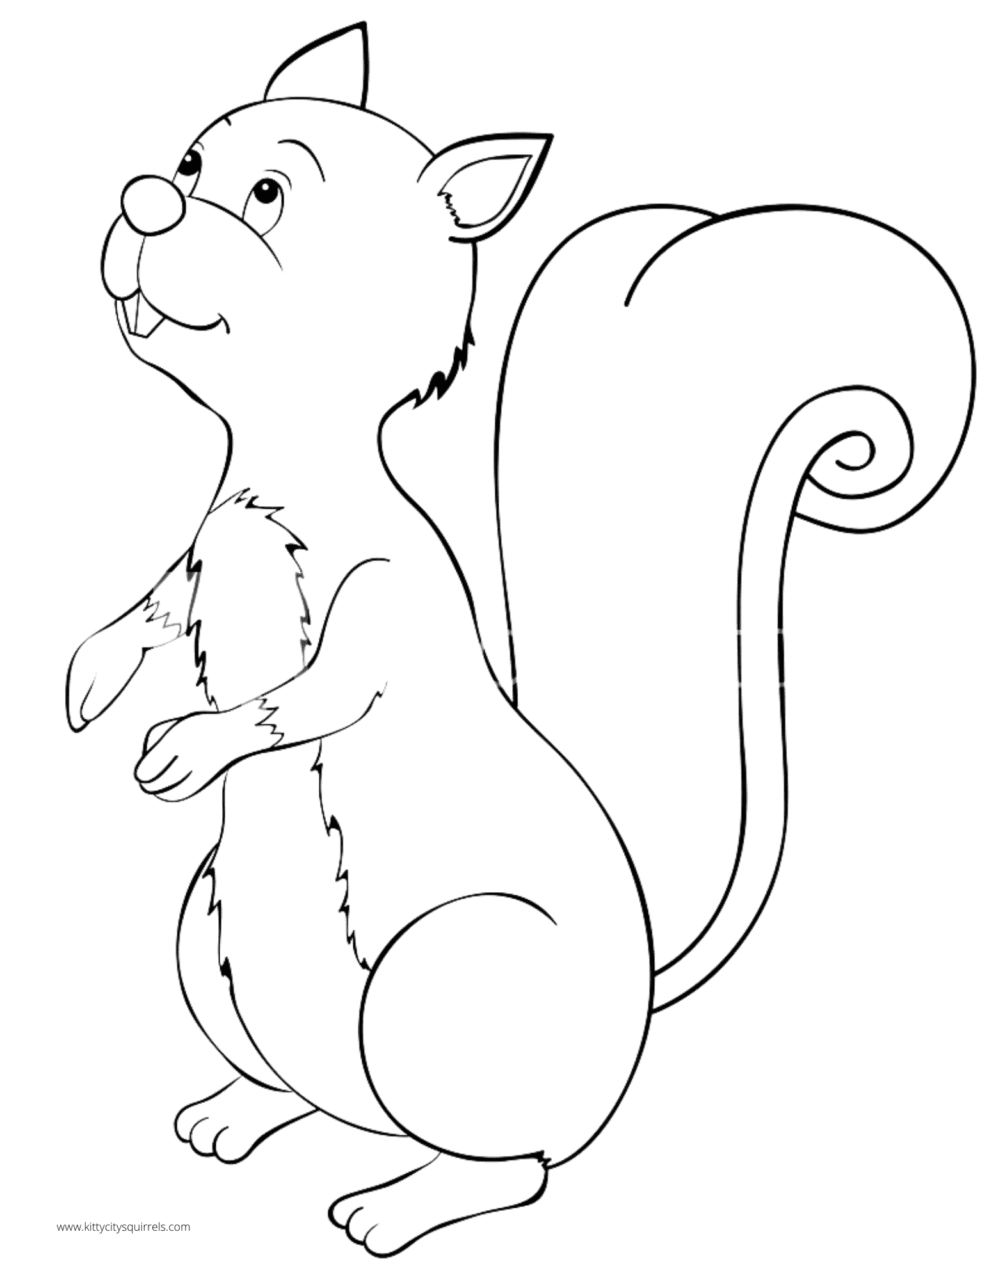 Squirrel Zone-Squirrel Coloring Pages | Kitty City Squirrels